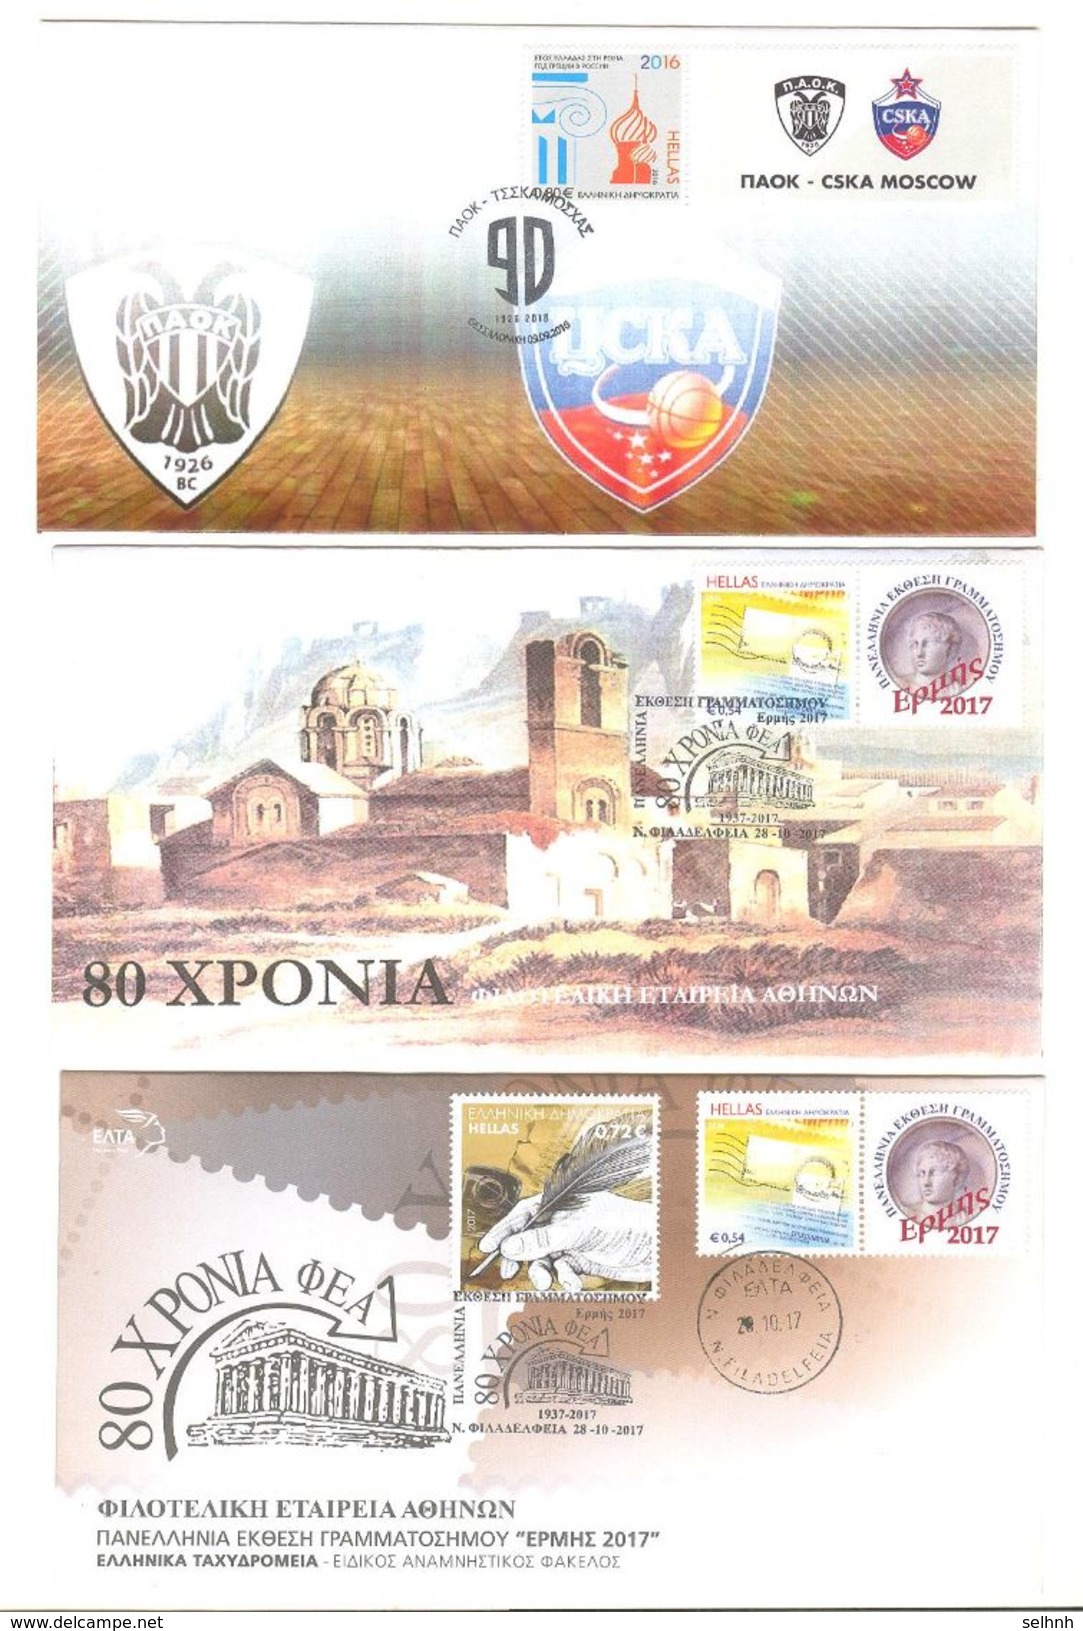 GREECE GRECE GREEK 8 COVERS WITH COMMEMORATIVE POSTMARKS AND VIGNETTES OF 2016 AND 2017 - Sellados Mecánicos ( Publicitario)